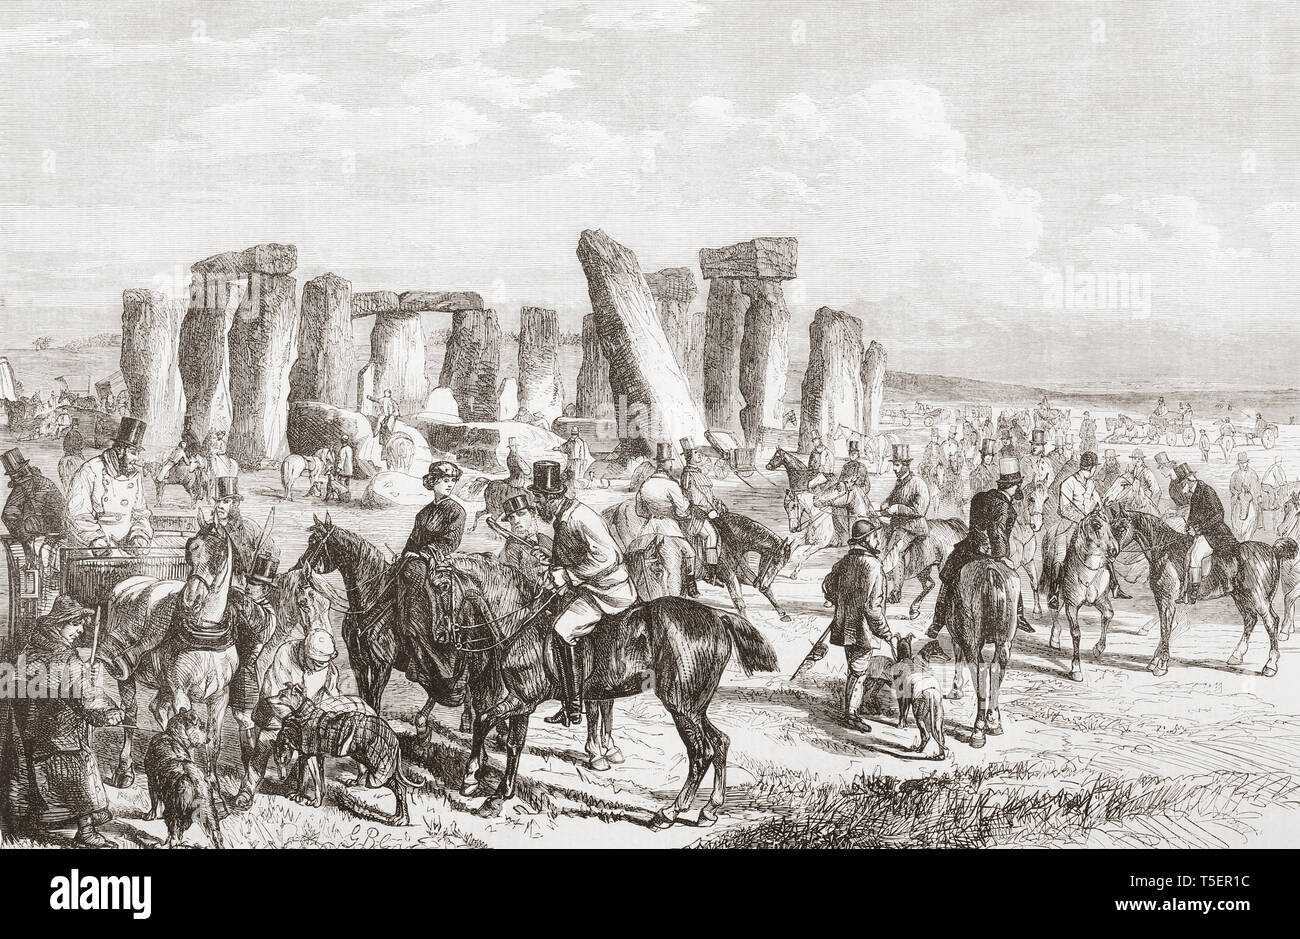 The Wiltshire Champion Coursing Meeting, Stonehenge, Wiltshire, England, seen here in the 19th century.  From The Illustrated London News, published 1865. Stock Photo